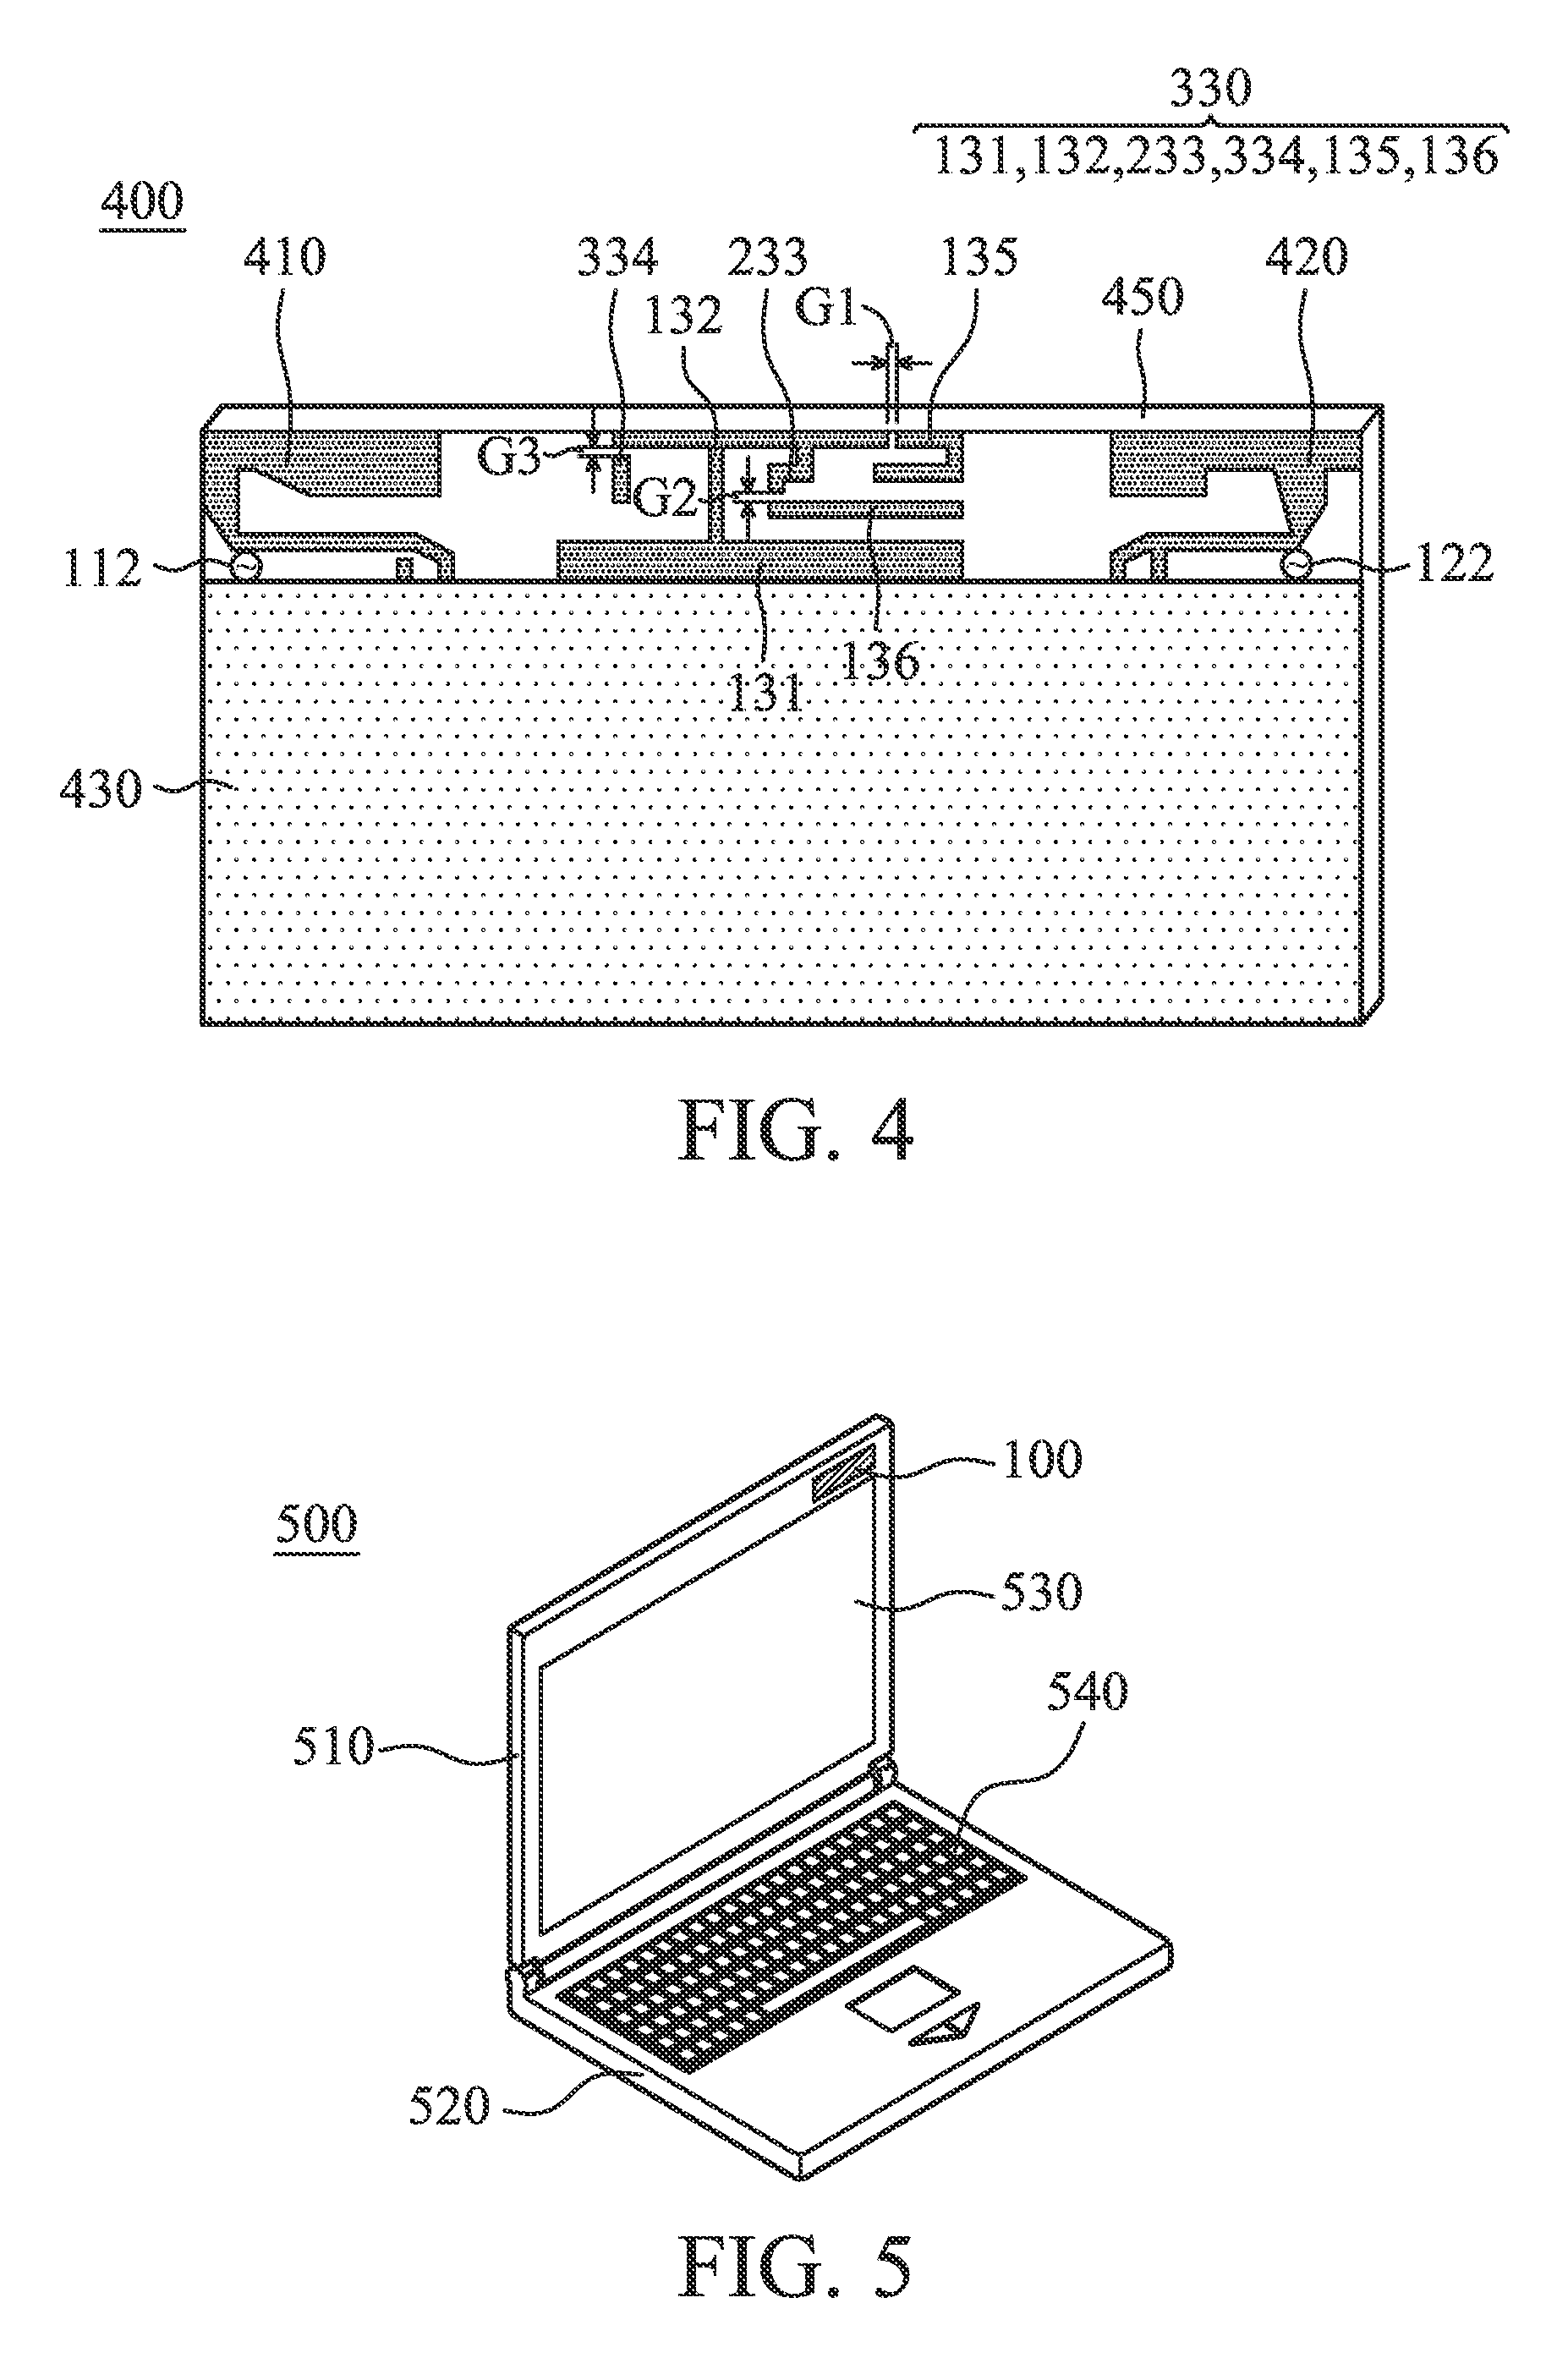 Antenna system with high isolation characteristics